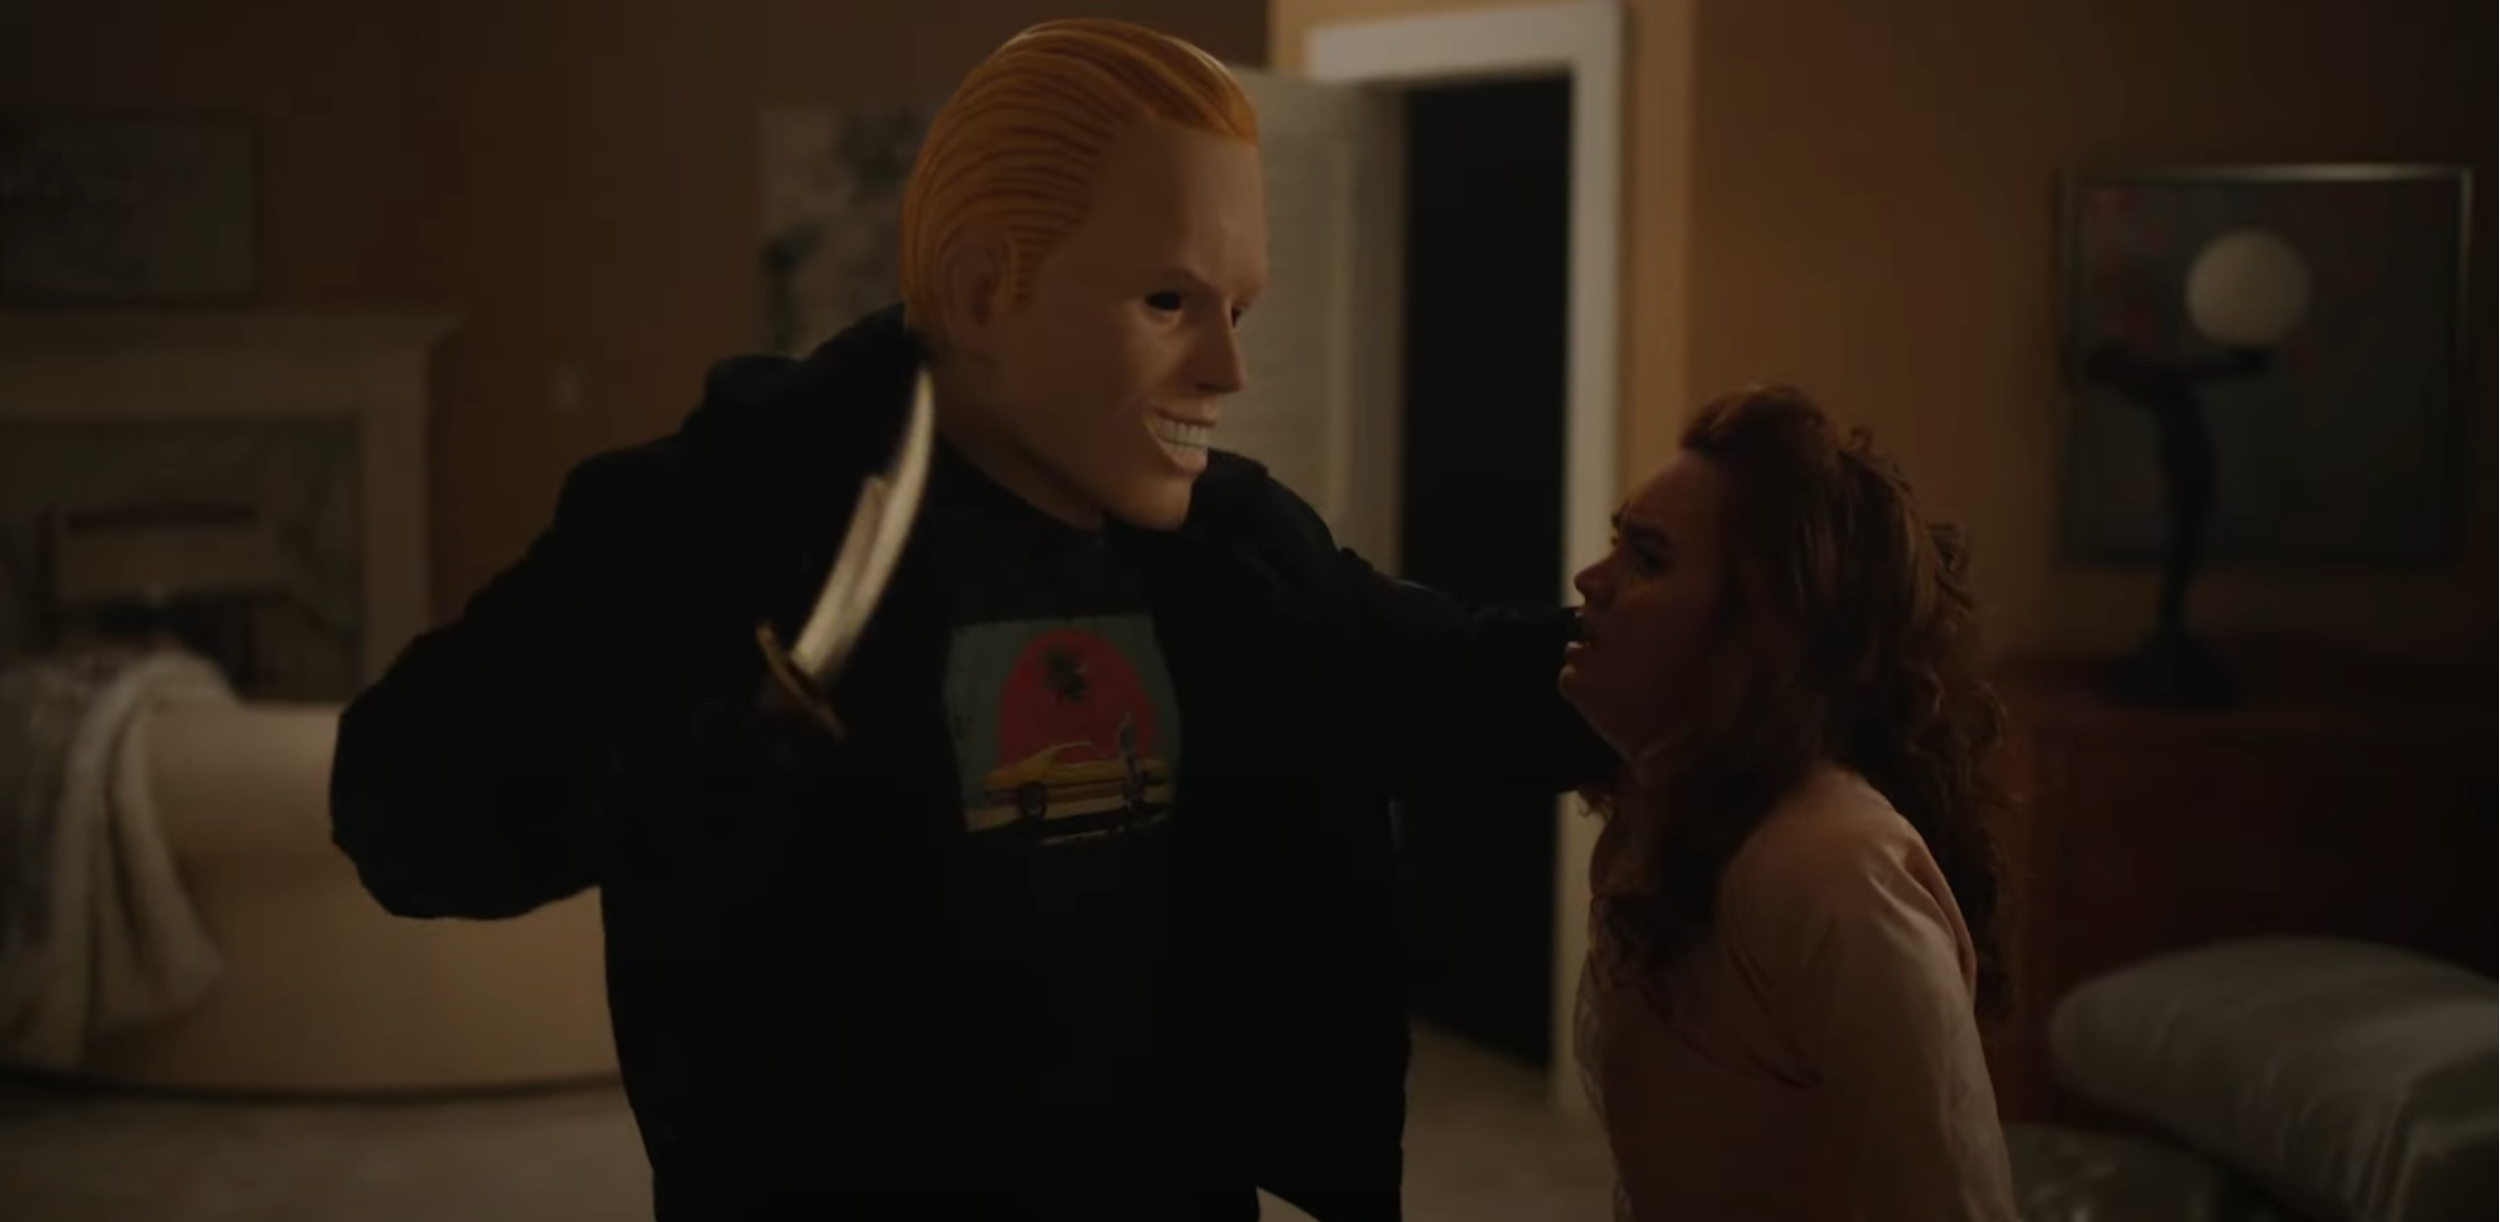 Get A Look At The Next Blumhouse Slasher In New TOTALLY KILLER Still